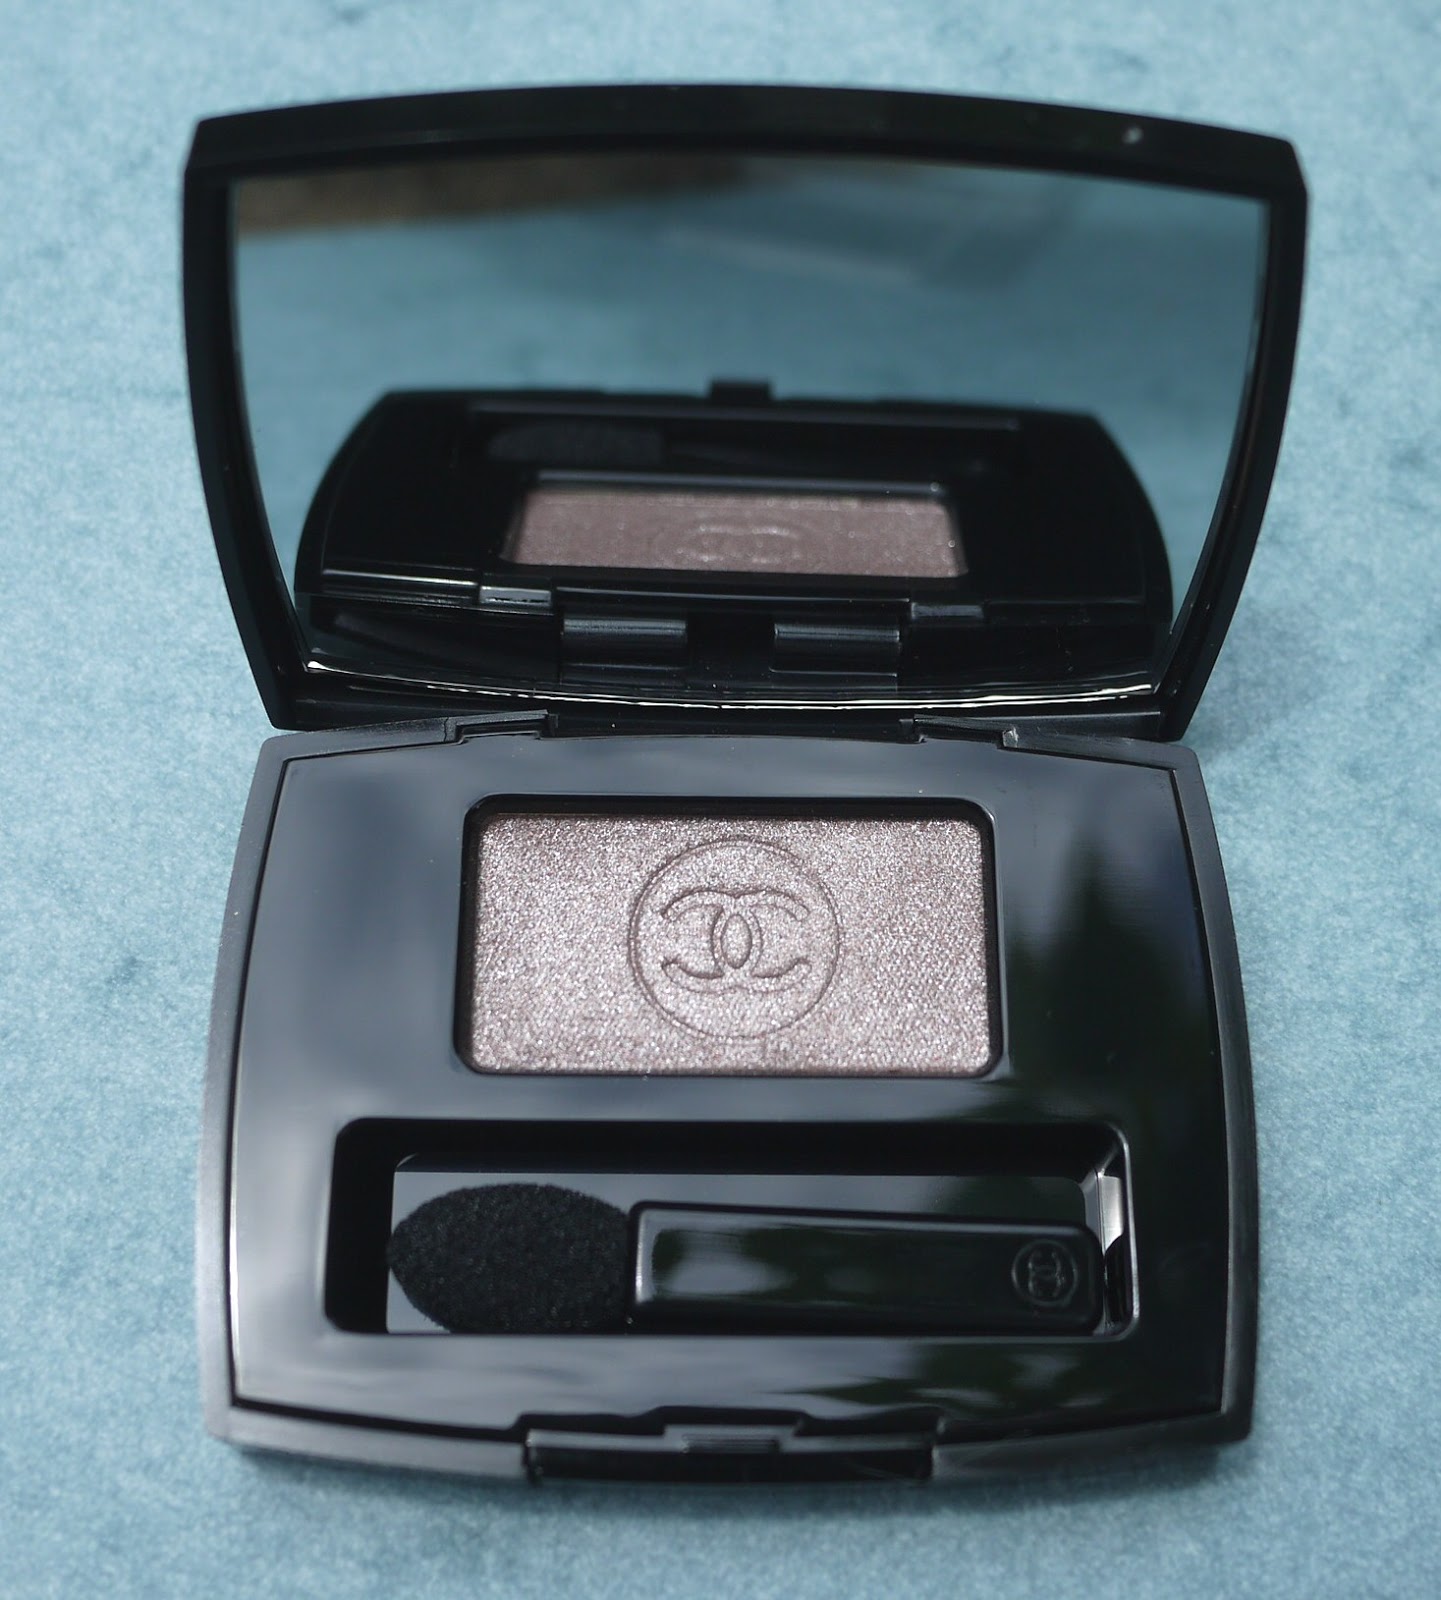 Samarbejde Mobilisere Biprodukt Best Things in Beauty: Chanel Ombre Essentielle Soft Touch Eyeshadow for  Fall 2013 - Gri-Gri and Hasard